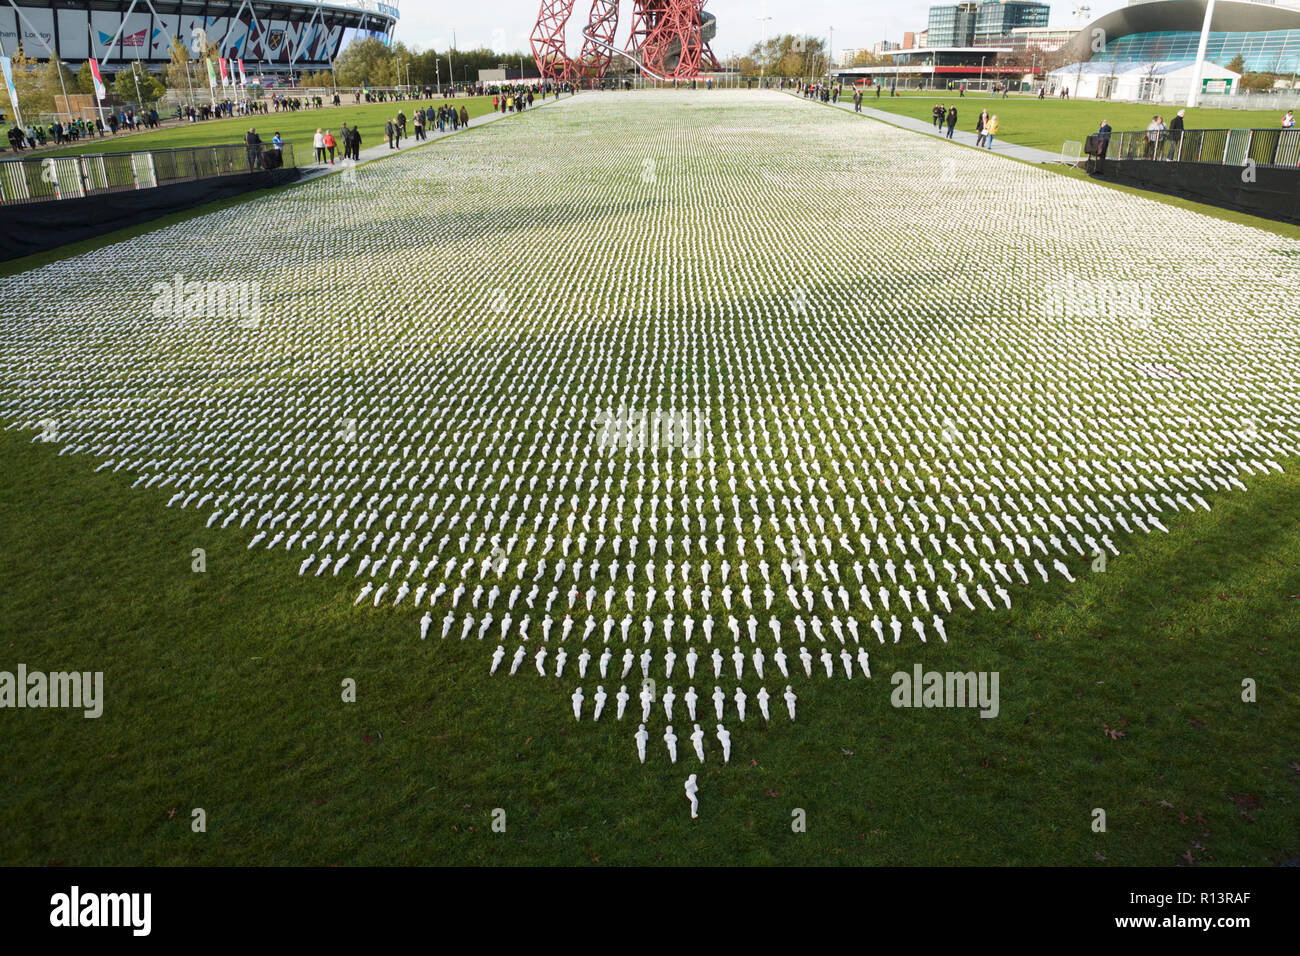 Remembrance Art: The Shrouds of the Somme WW1 installation, by Rob Heard, Queen Elizabeth Olympic Park, London, UK. Remembrance Day. World War one ART Stock Photo